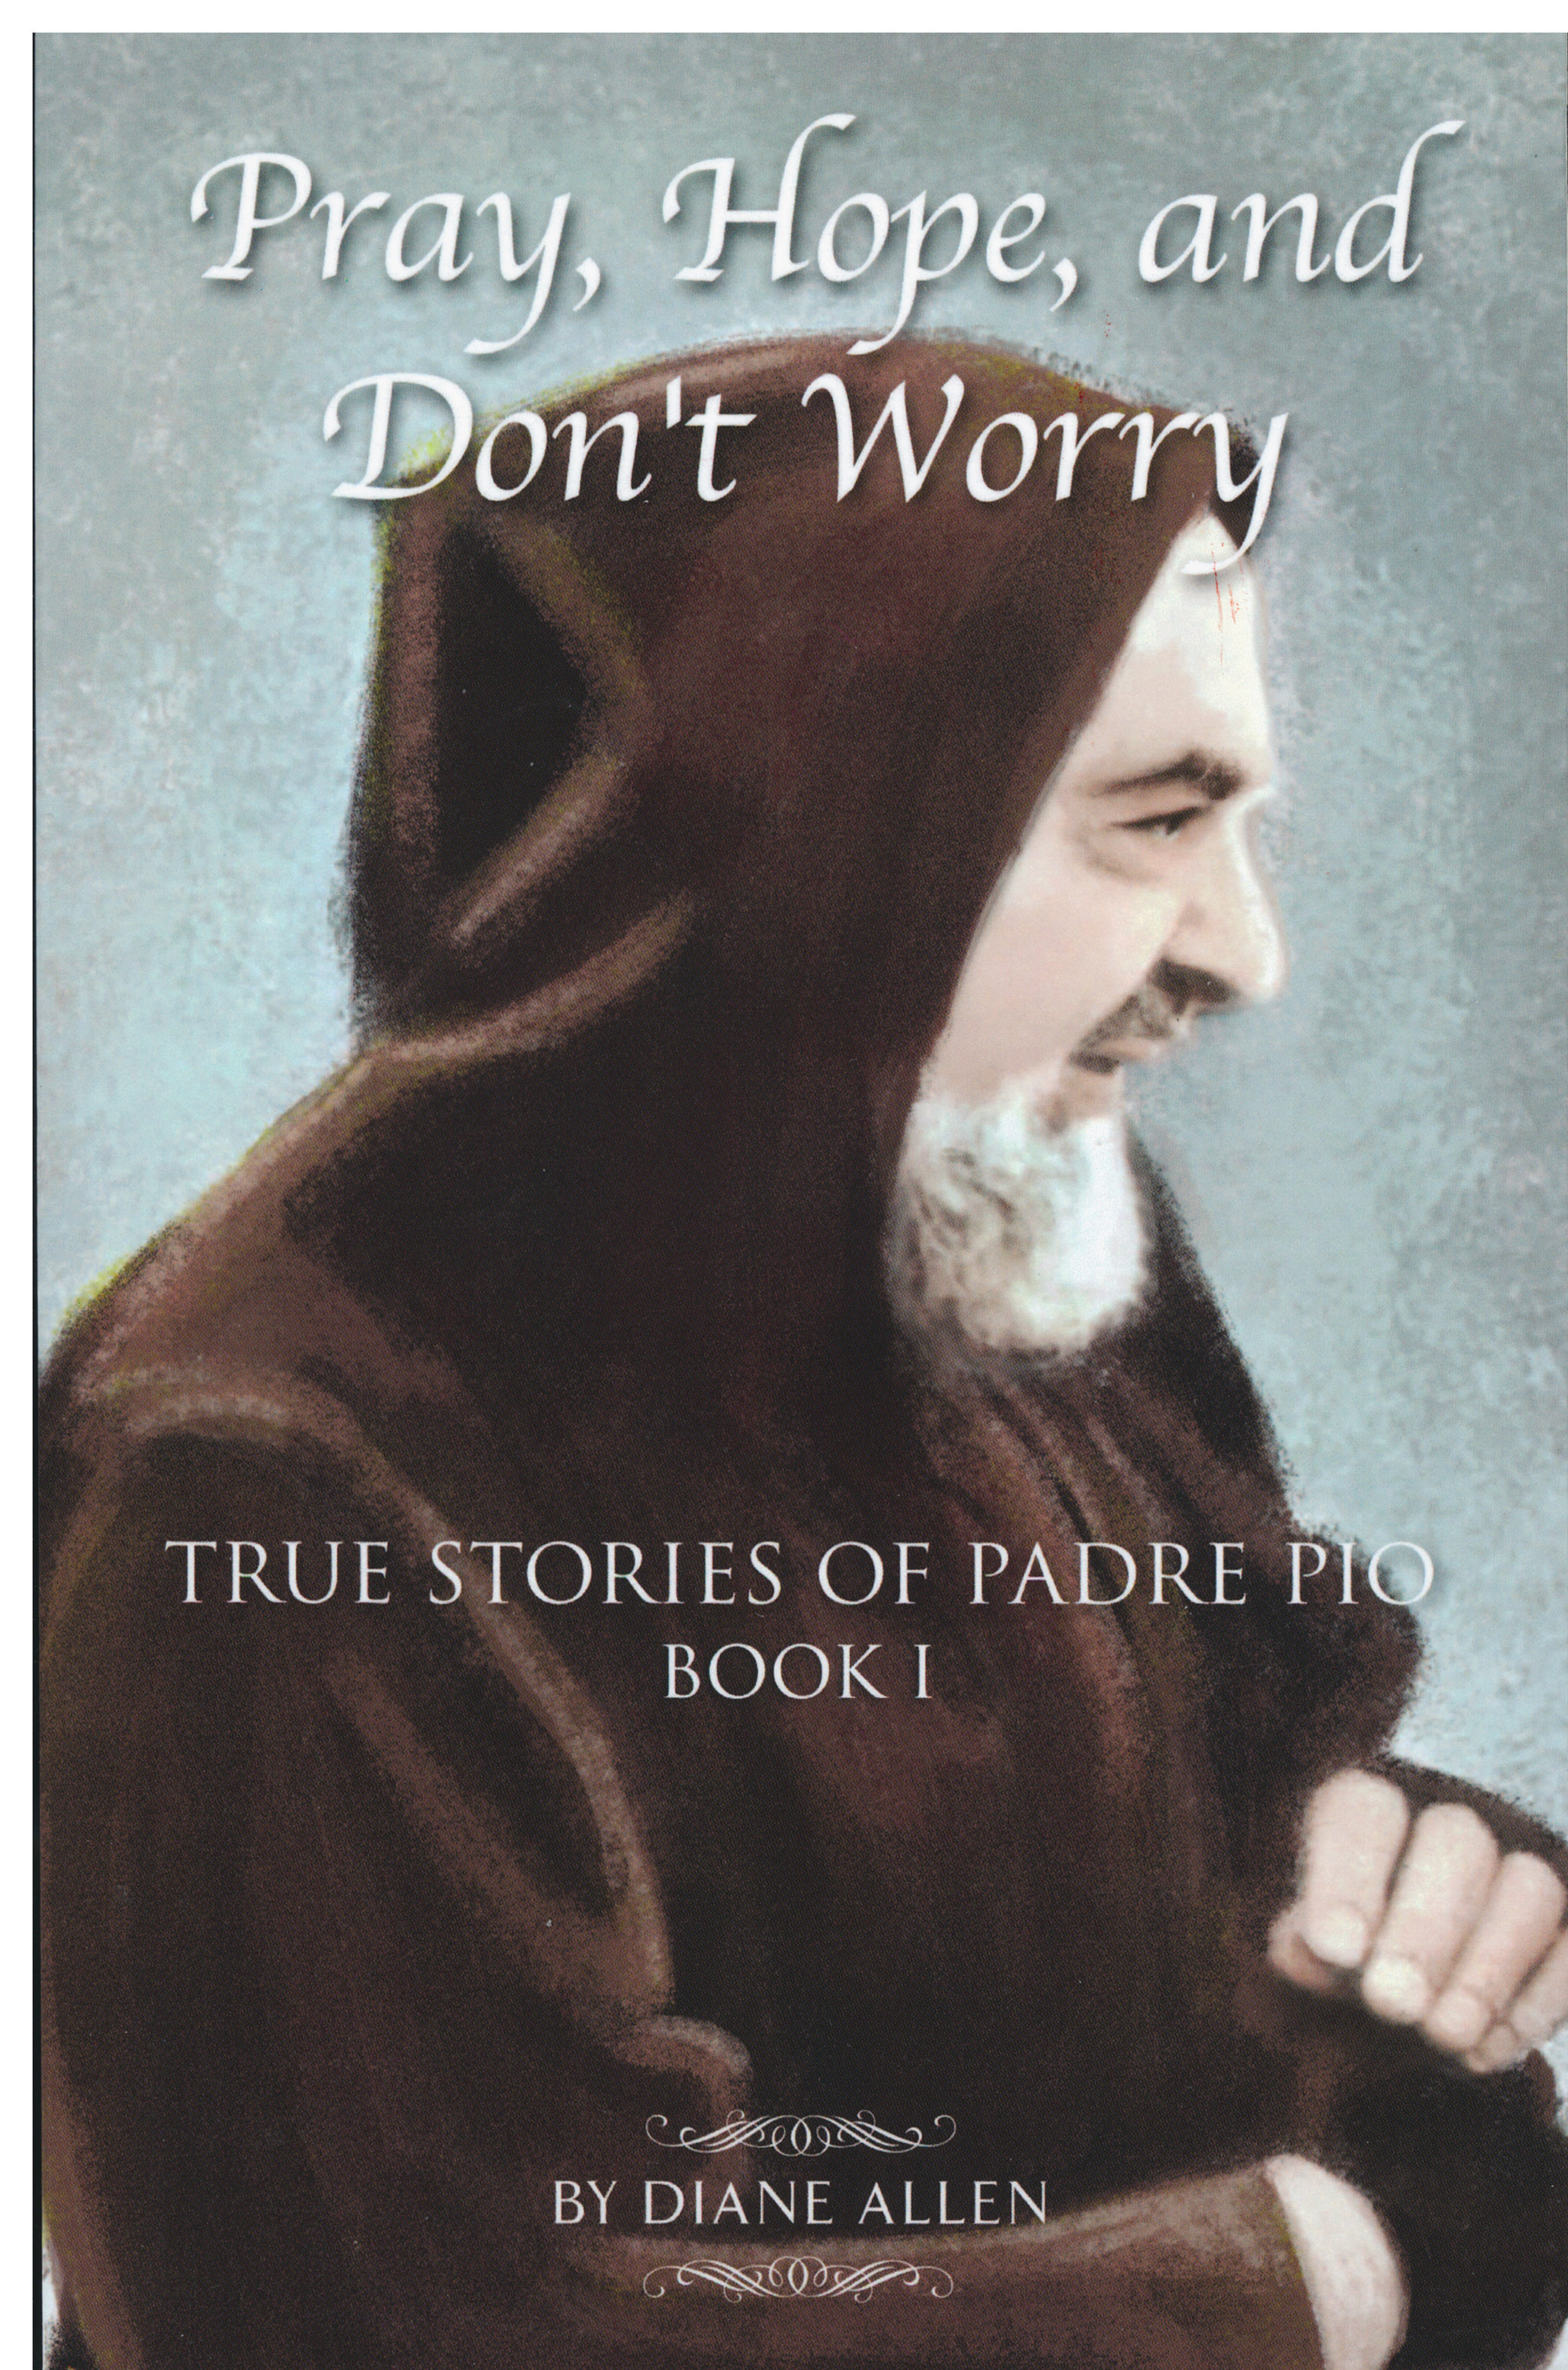 Pray Hope and Don't Worry by Diane Allen 108-9780983710516